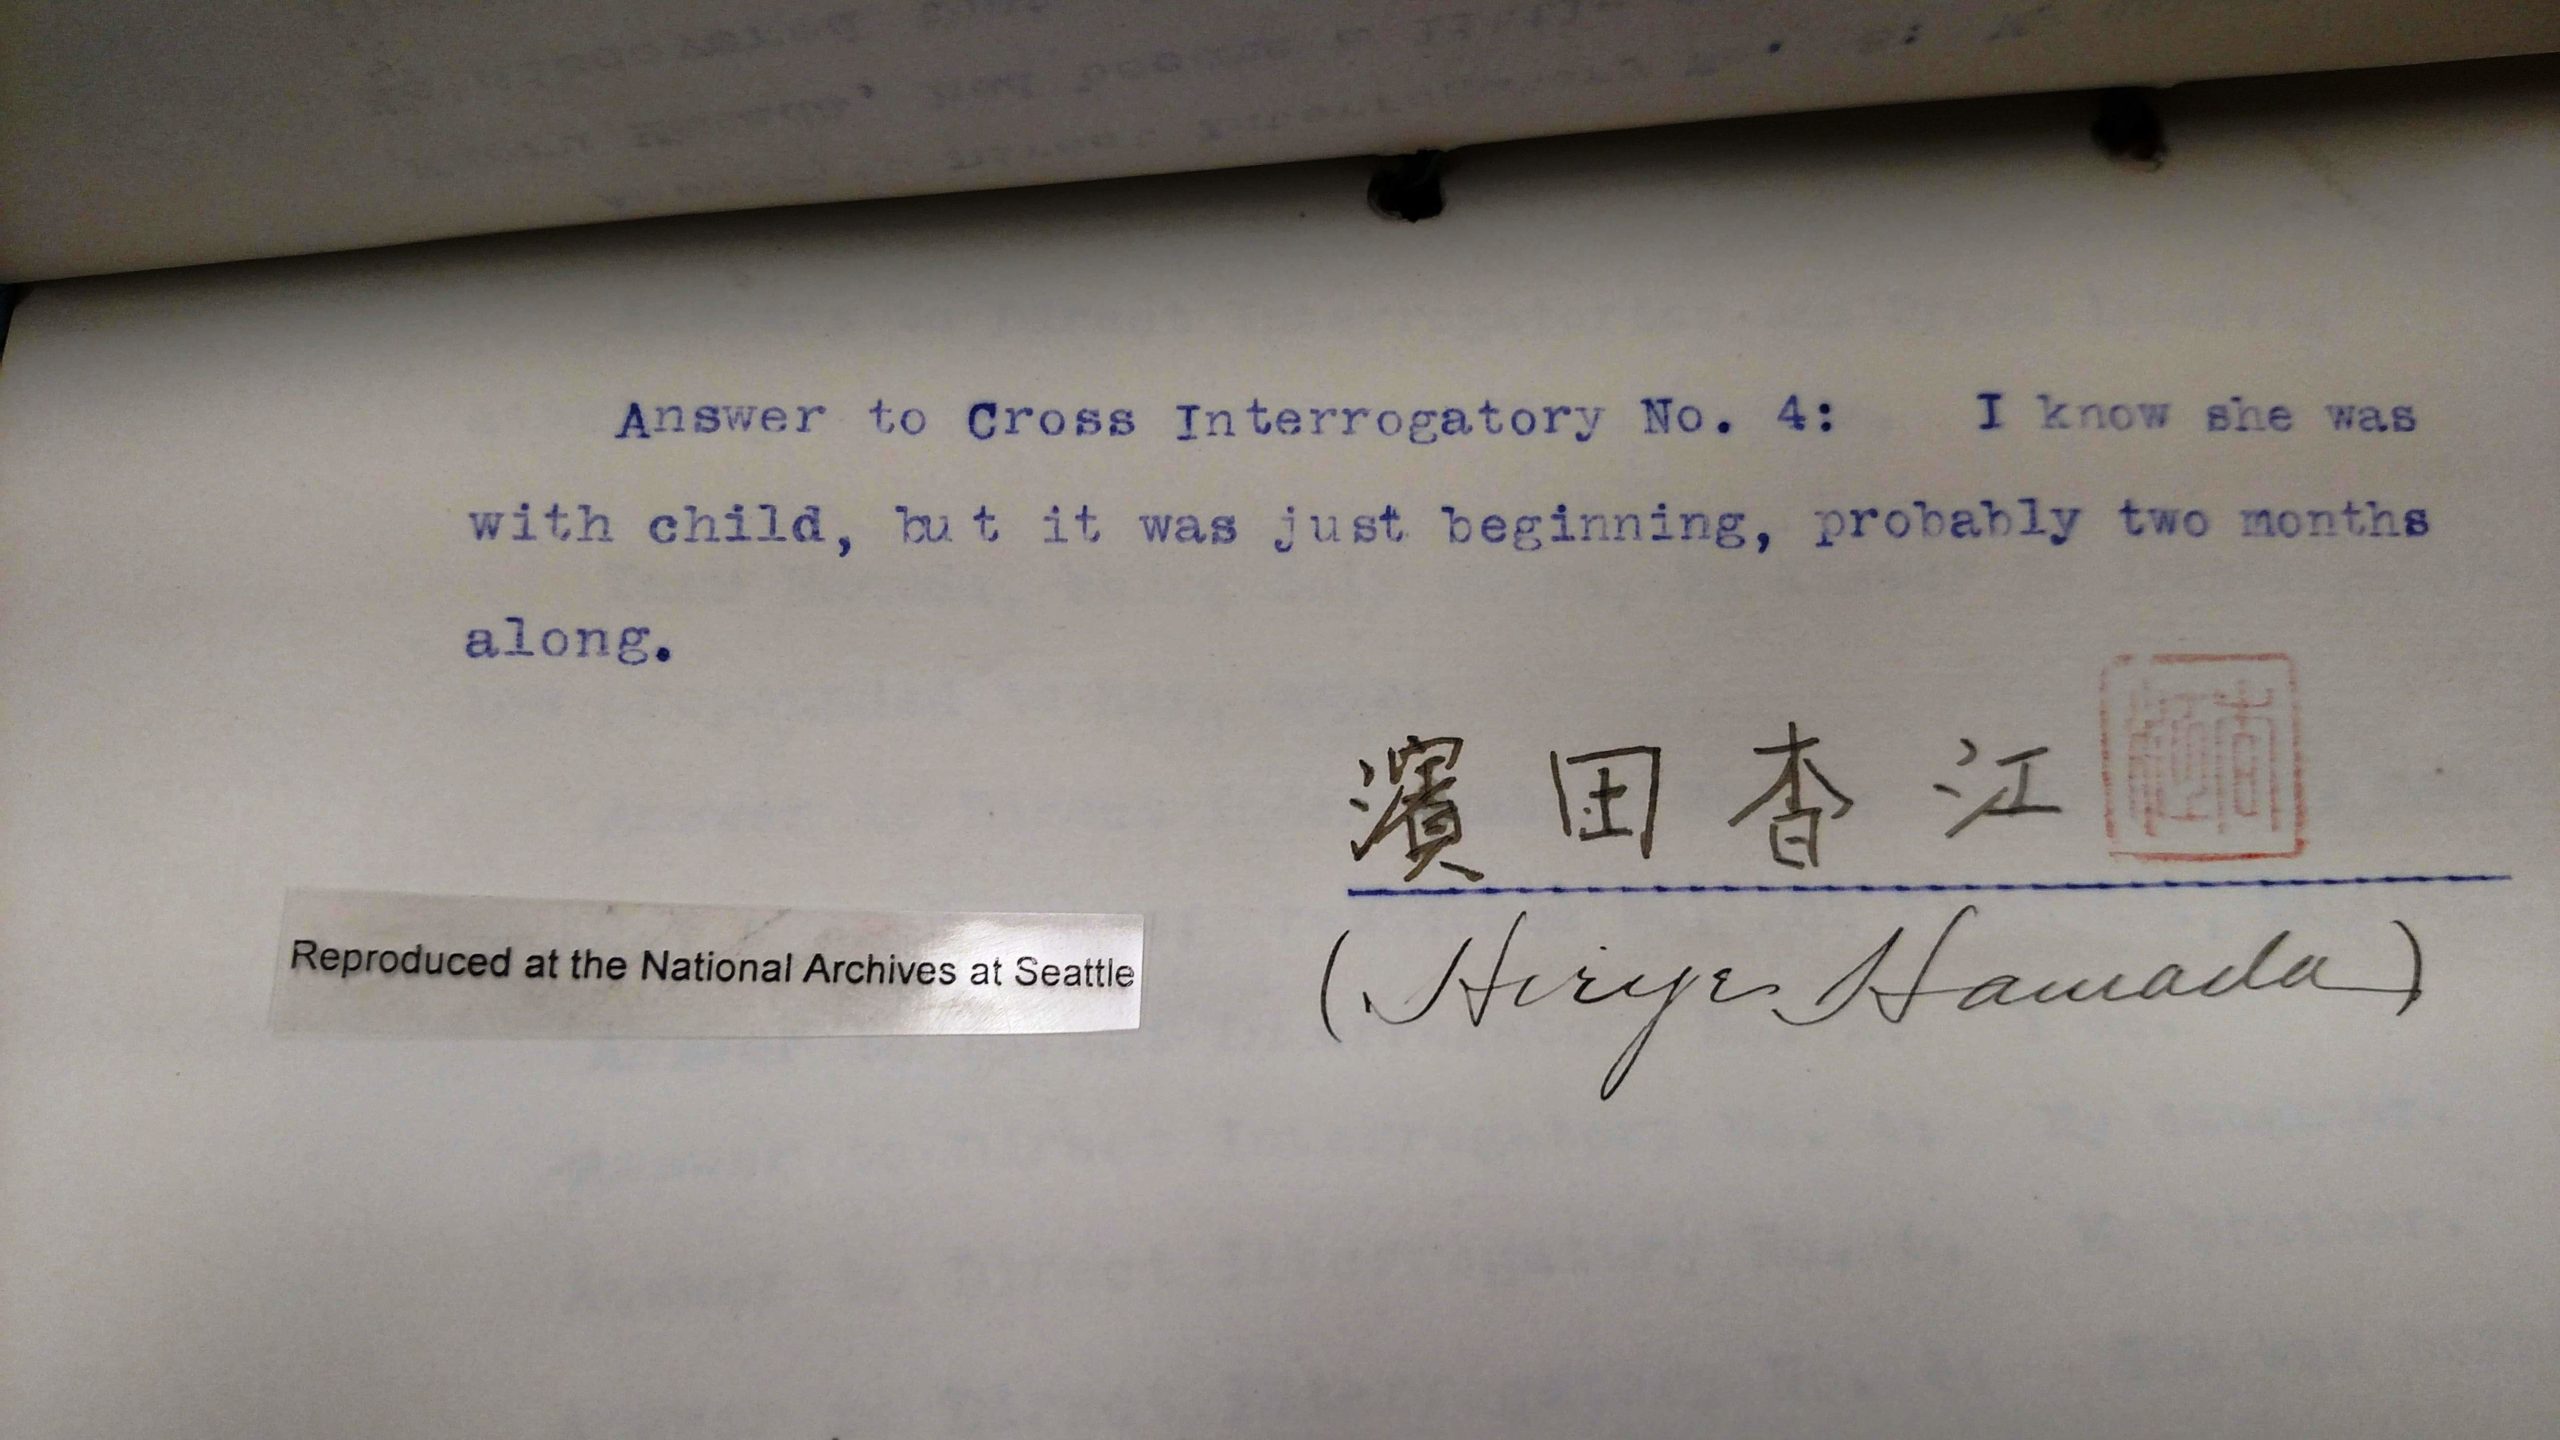 A detail from deposition of Hirye Hamada, Kaoru’s father, that says "I know she was with child, but it was just beginning, probably two months along." 
